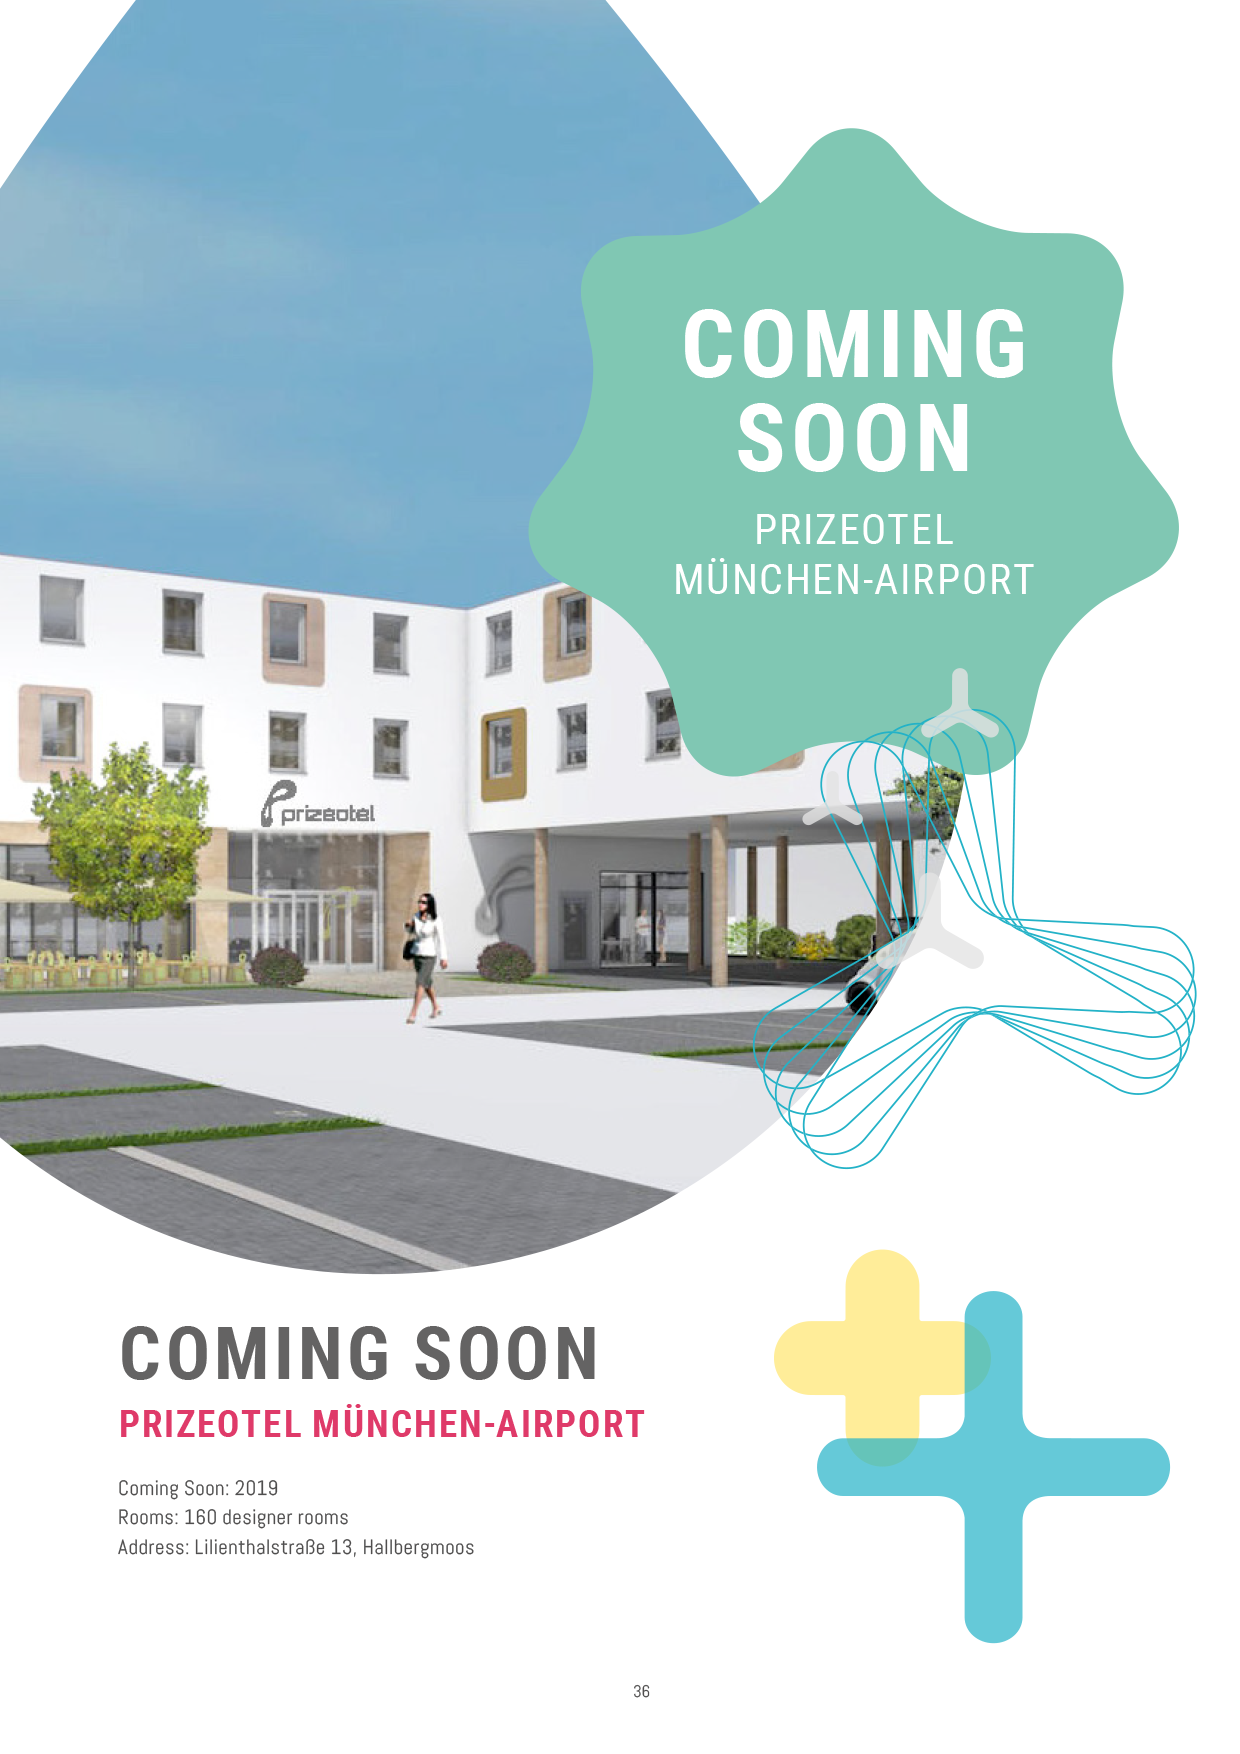 Coming Soon - prizeotel Munich-Airport